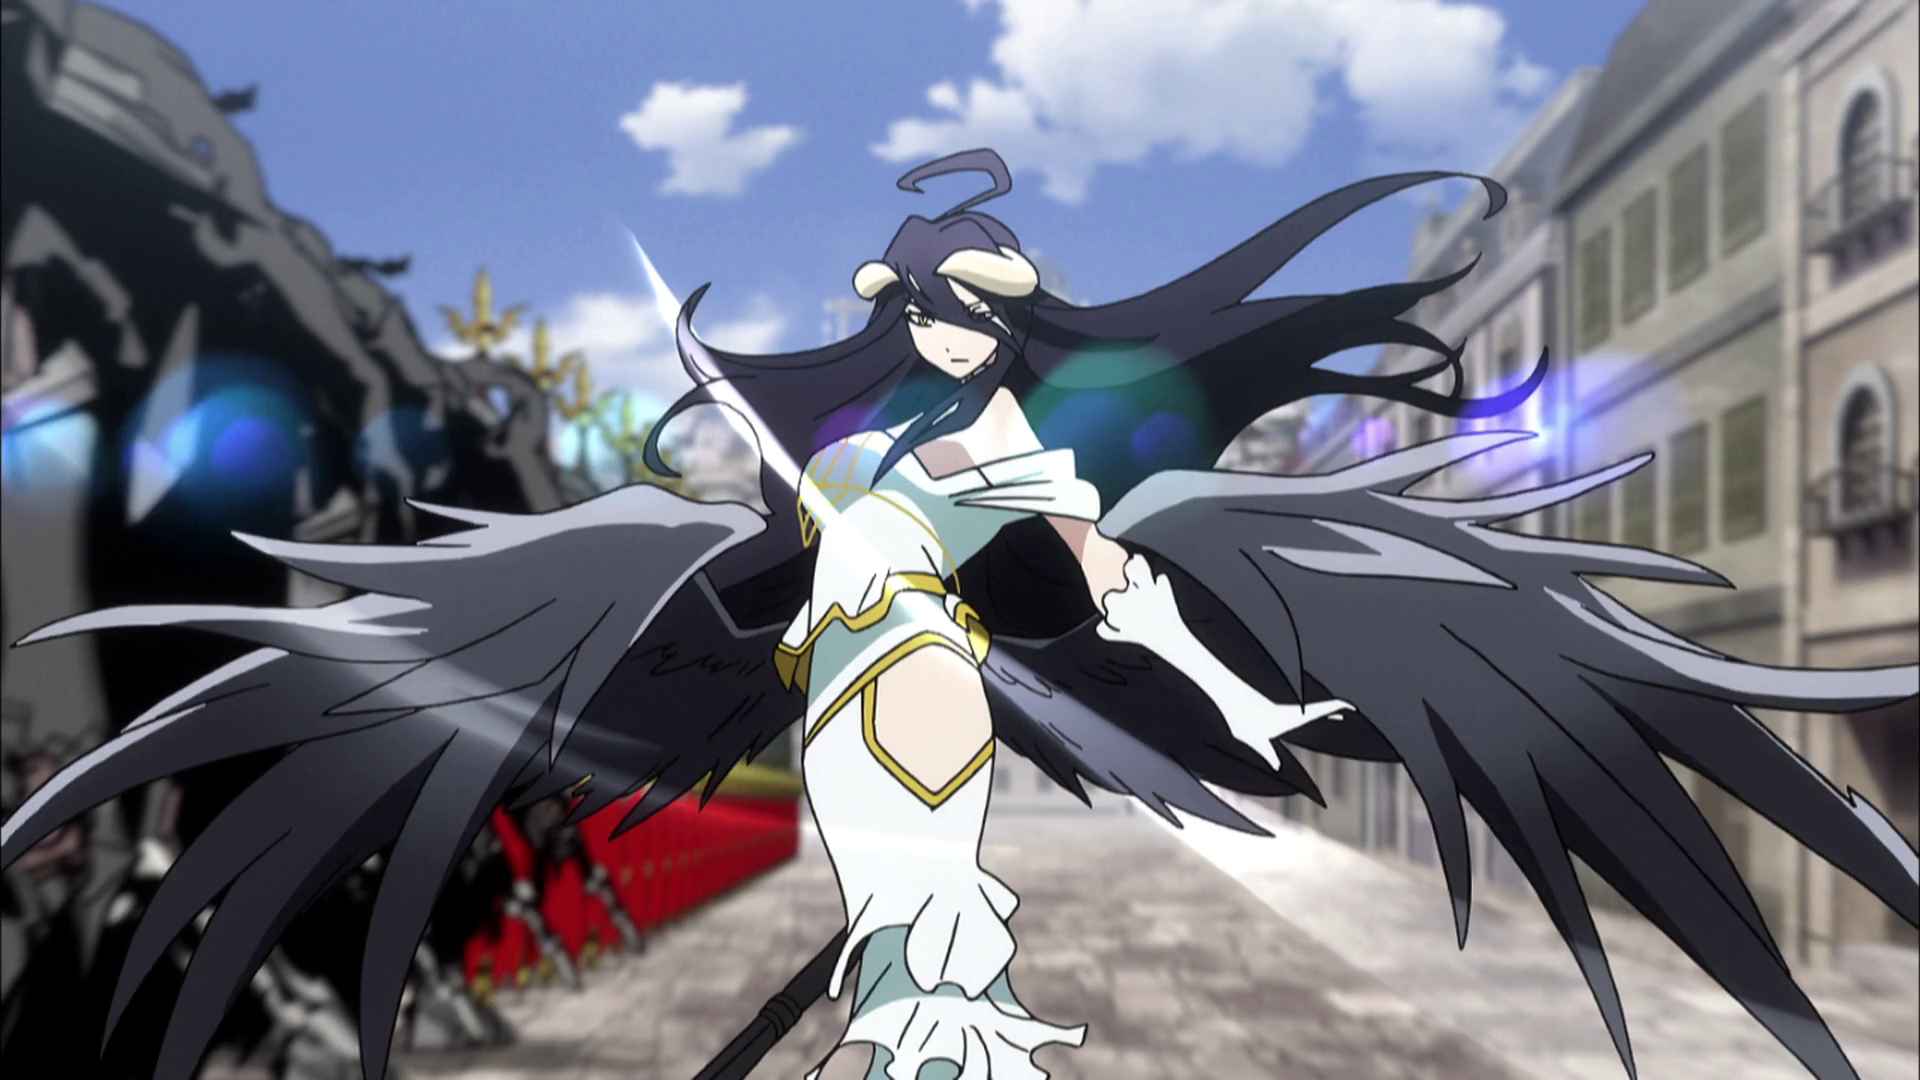 Albedo Overlord Hd Wallpaper Background Image 1920x1080 Id